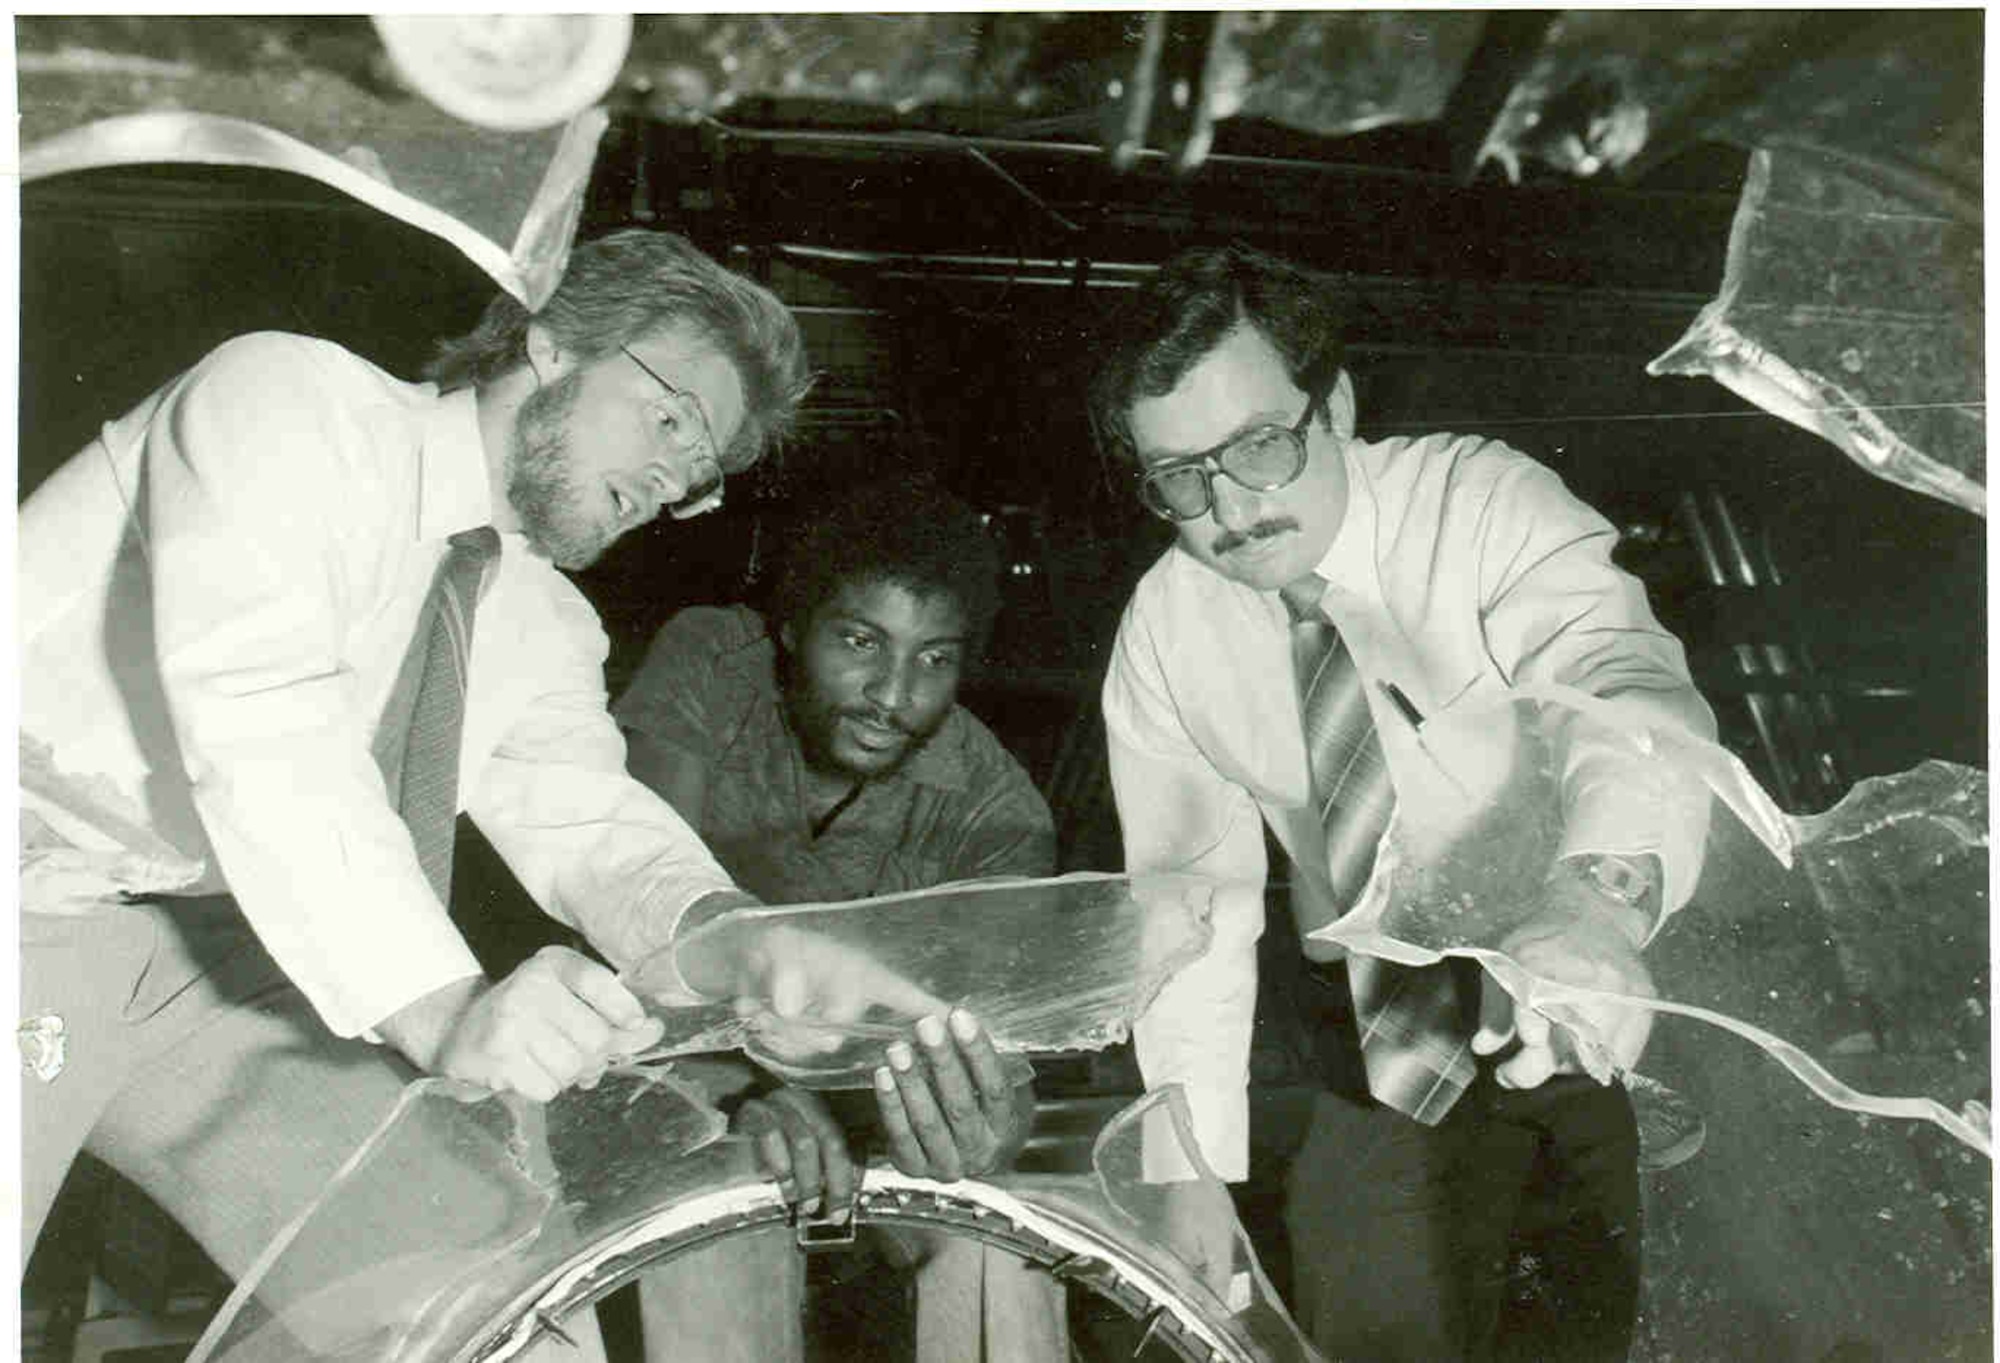 A windshield that did not stand up to simulated bird strike testing at the Bird Impact Range at Arnold Air Force Base, Tennessee, is inspected by project engineers Jon Storslee, left, and Butch Garrett, center, and then-Air Force test director Tom Best in 1982. The range, more famously known as the “Chicken Gun,” was used to simulate in-flight bird strikes to aircraft canopies and other materials by launching chicken carcasses at test articles. The first shot from the Chicken Gun was fired 50 years ago. (U.S. Air Force photo)